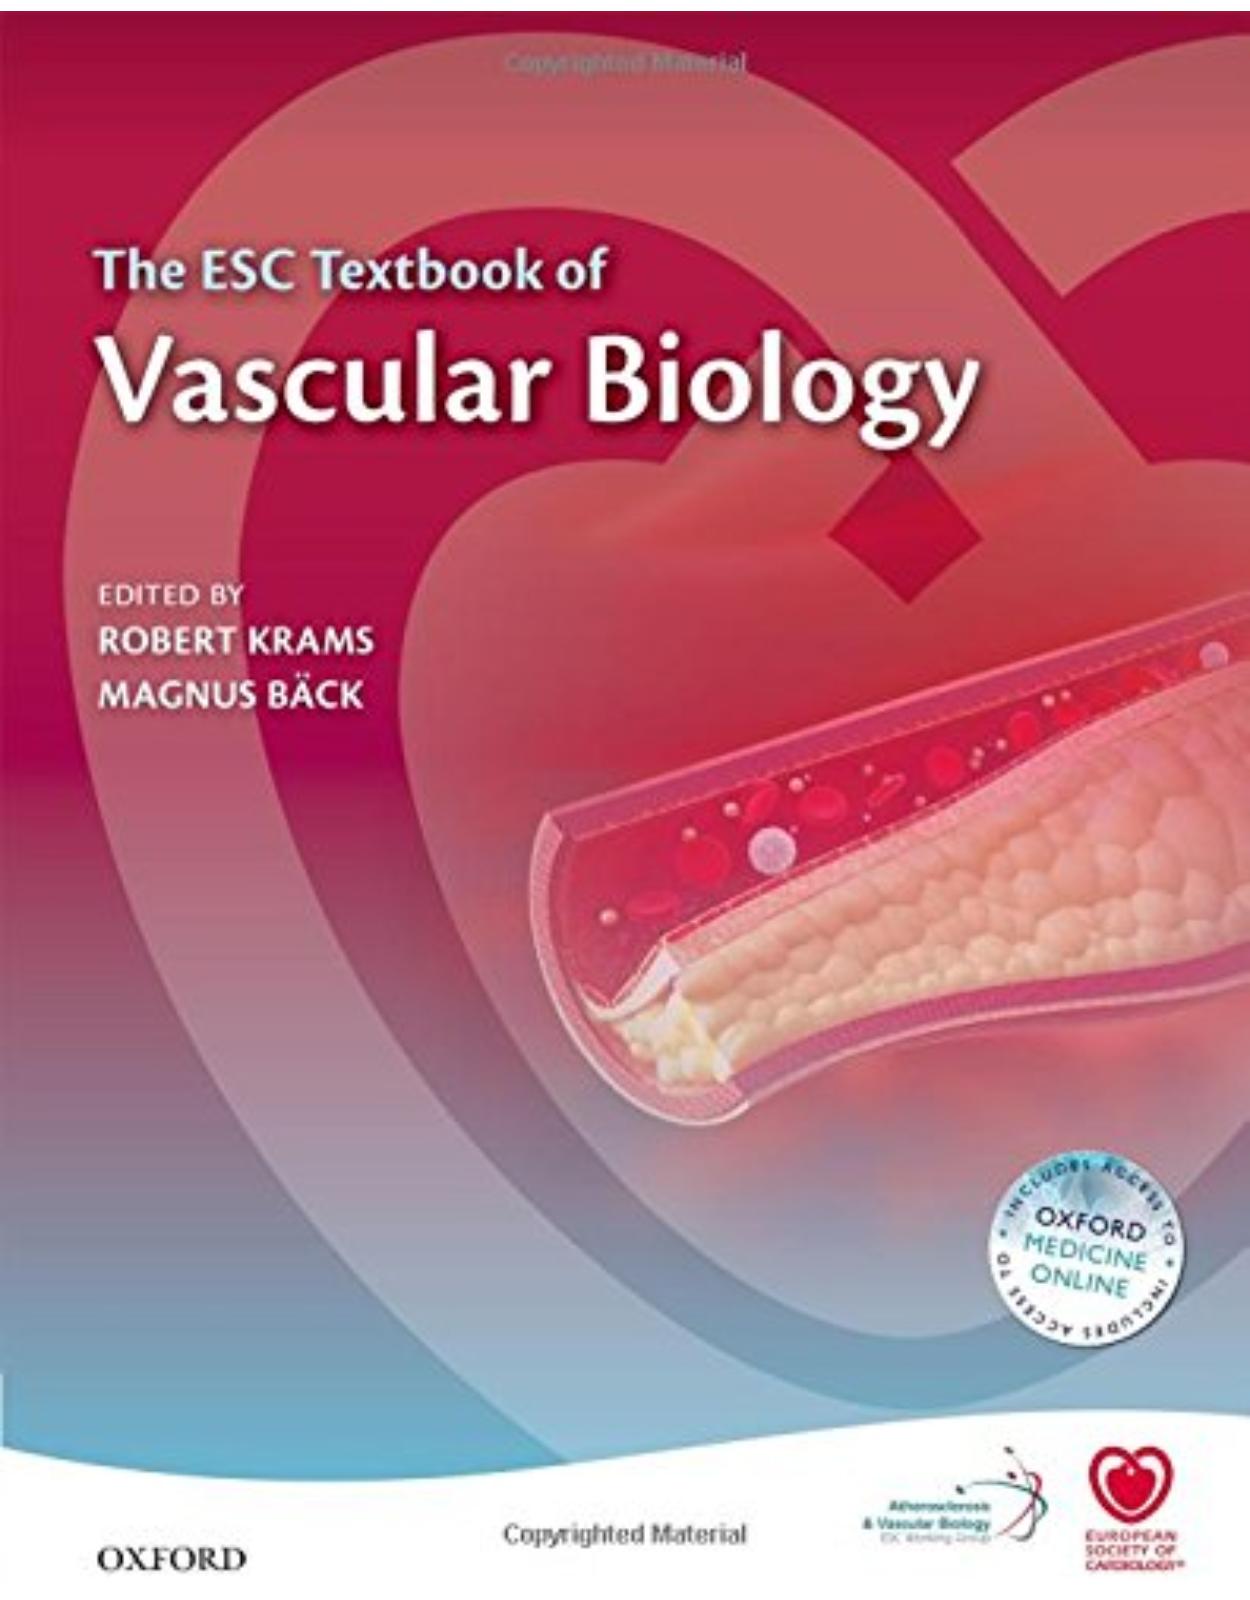 The ESC Textbook of Vascular Biology (The European Society of Cardiology Series)